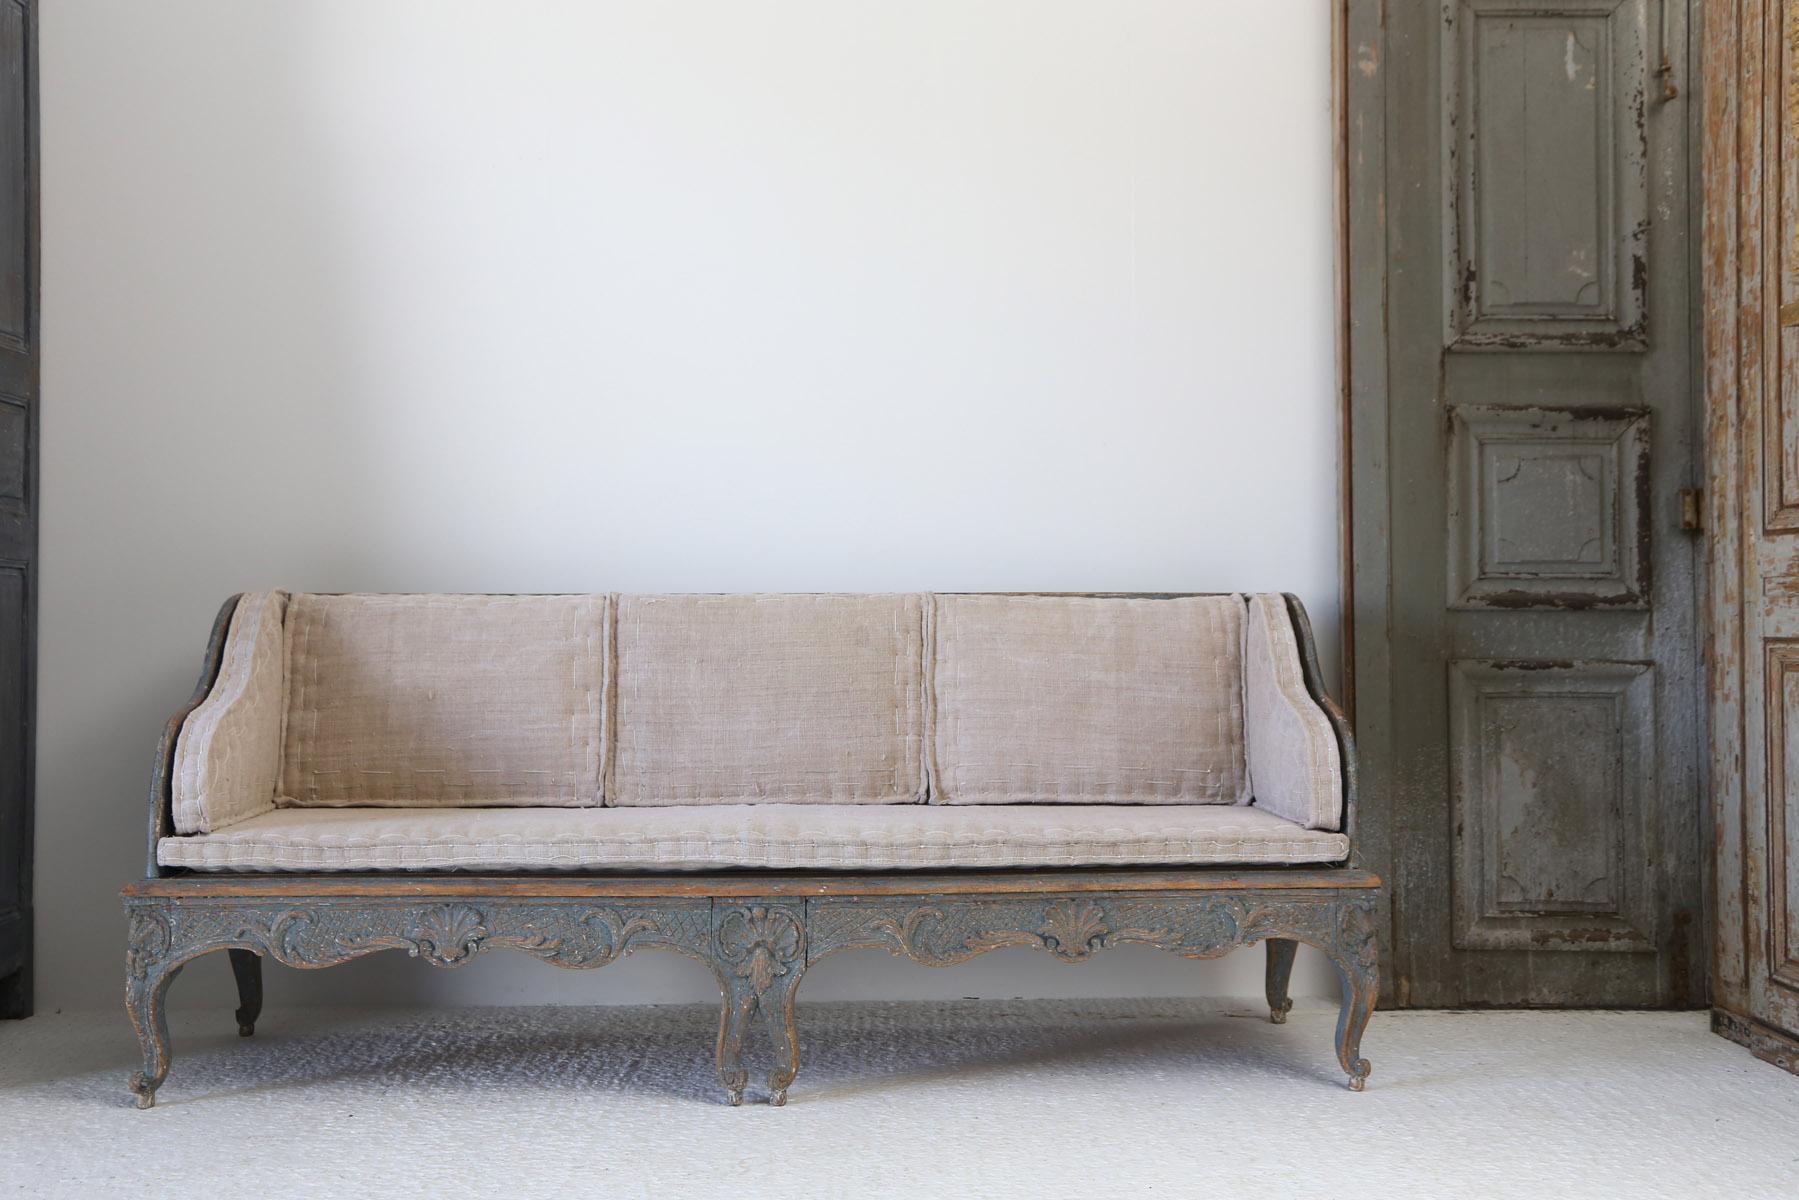 Early 18th Century Swedish Carved Sofa with Original Paintwork 3